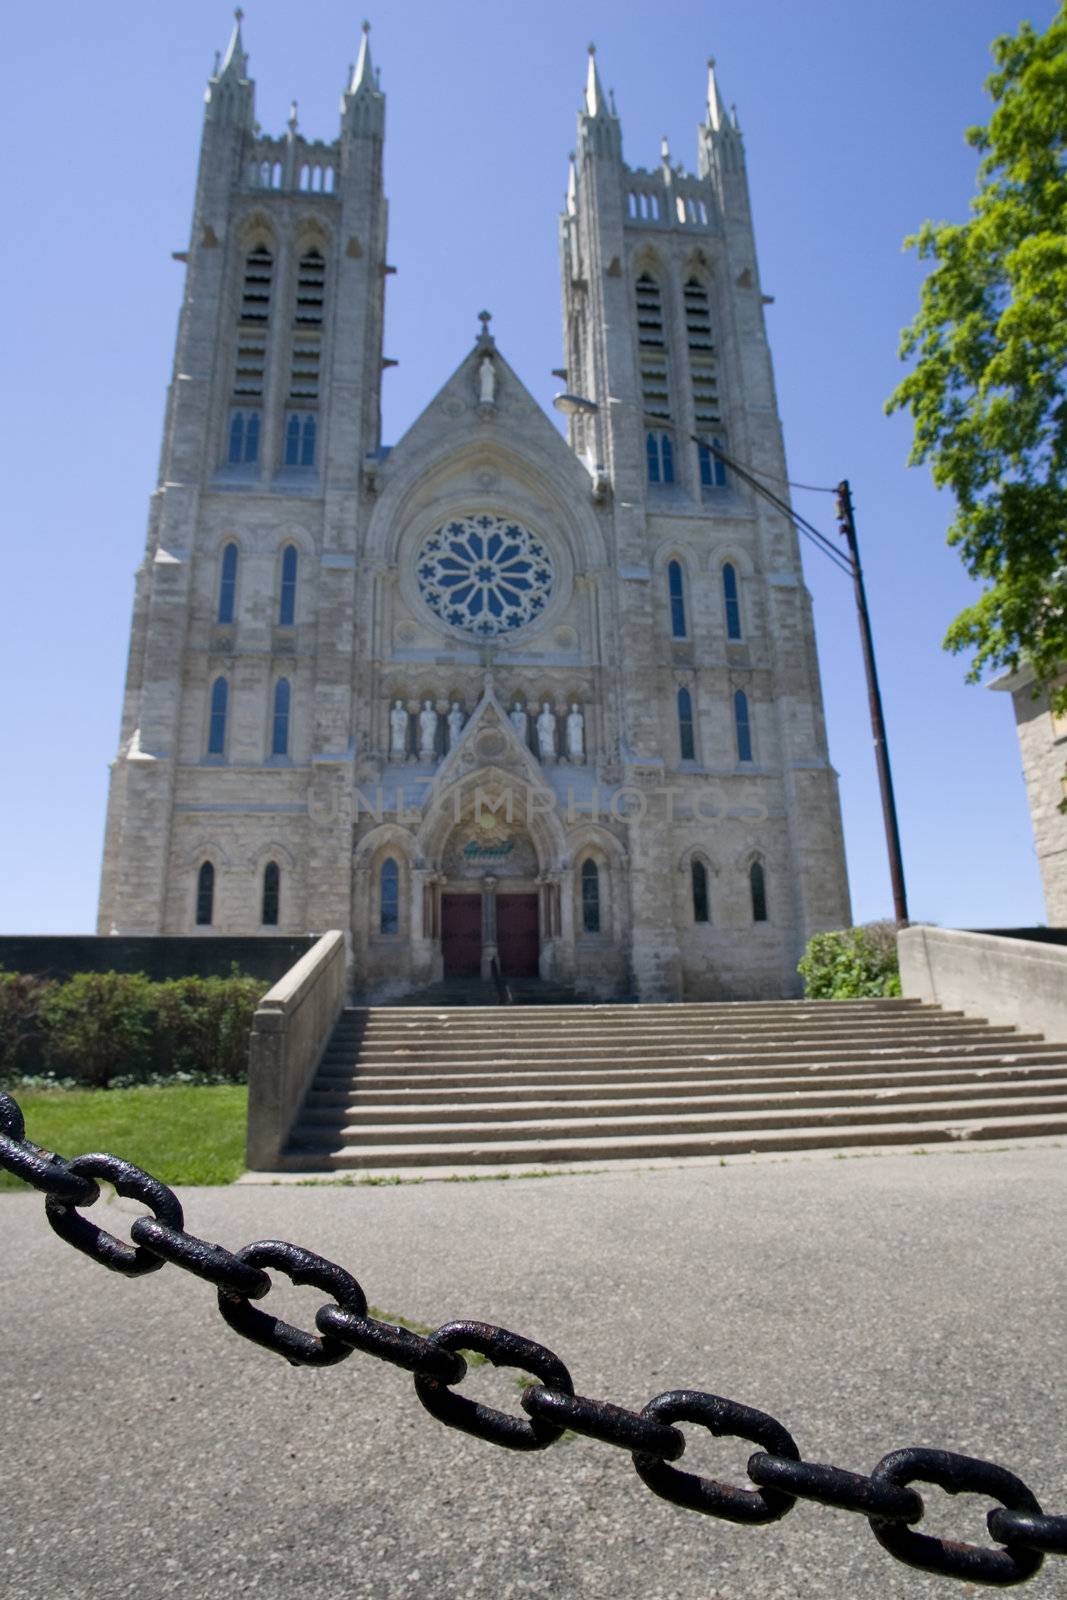 Looking up at the Church of Our Lady. Guelph, Ontario, Canada